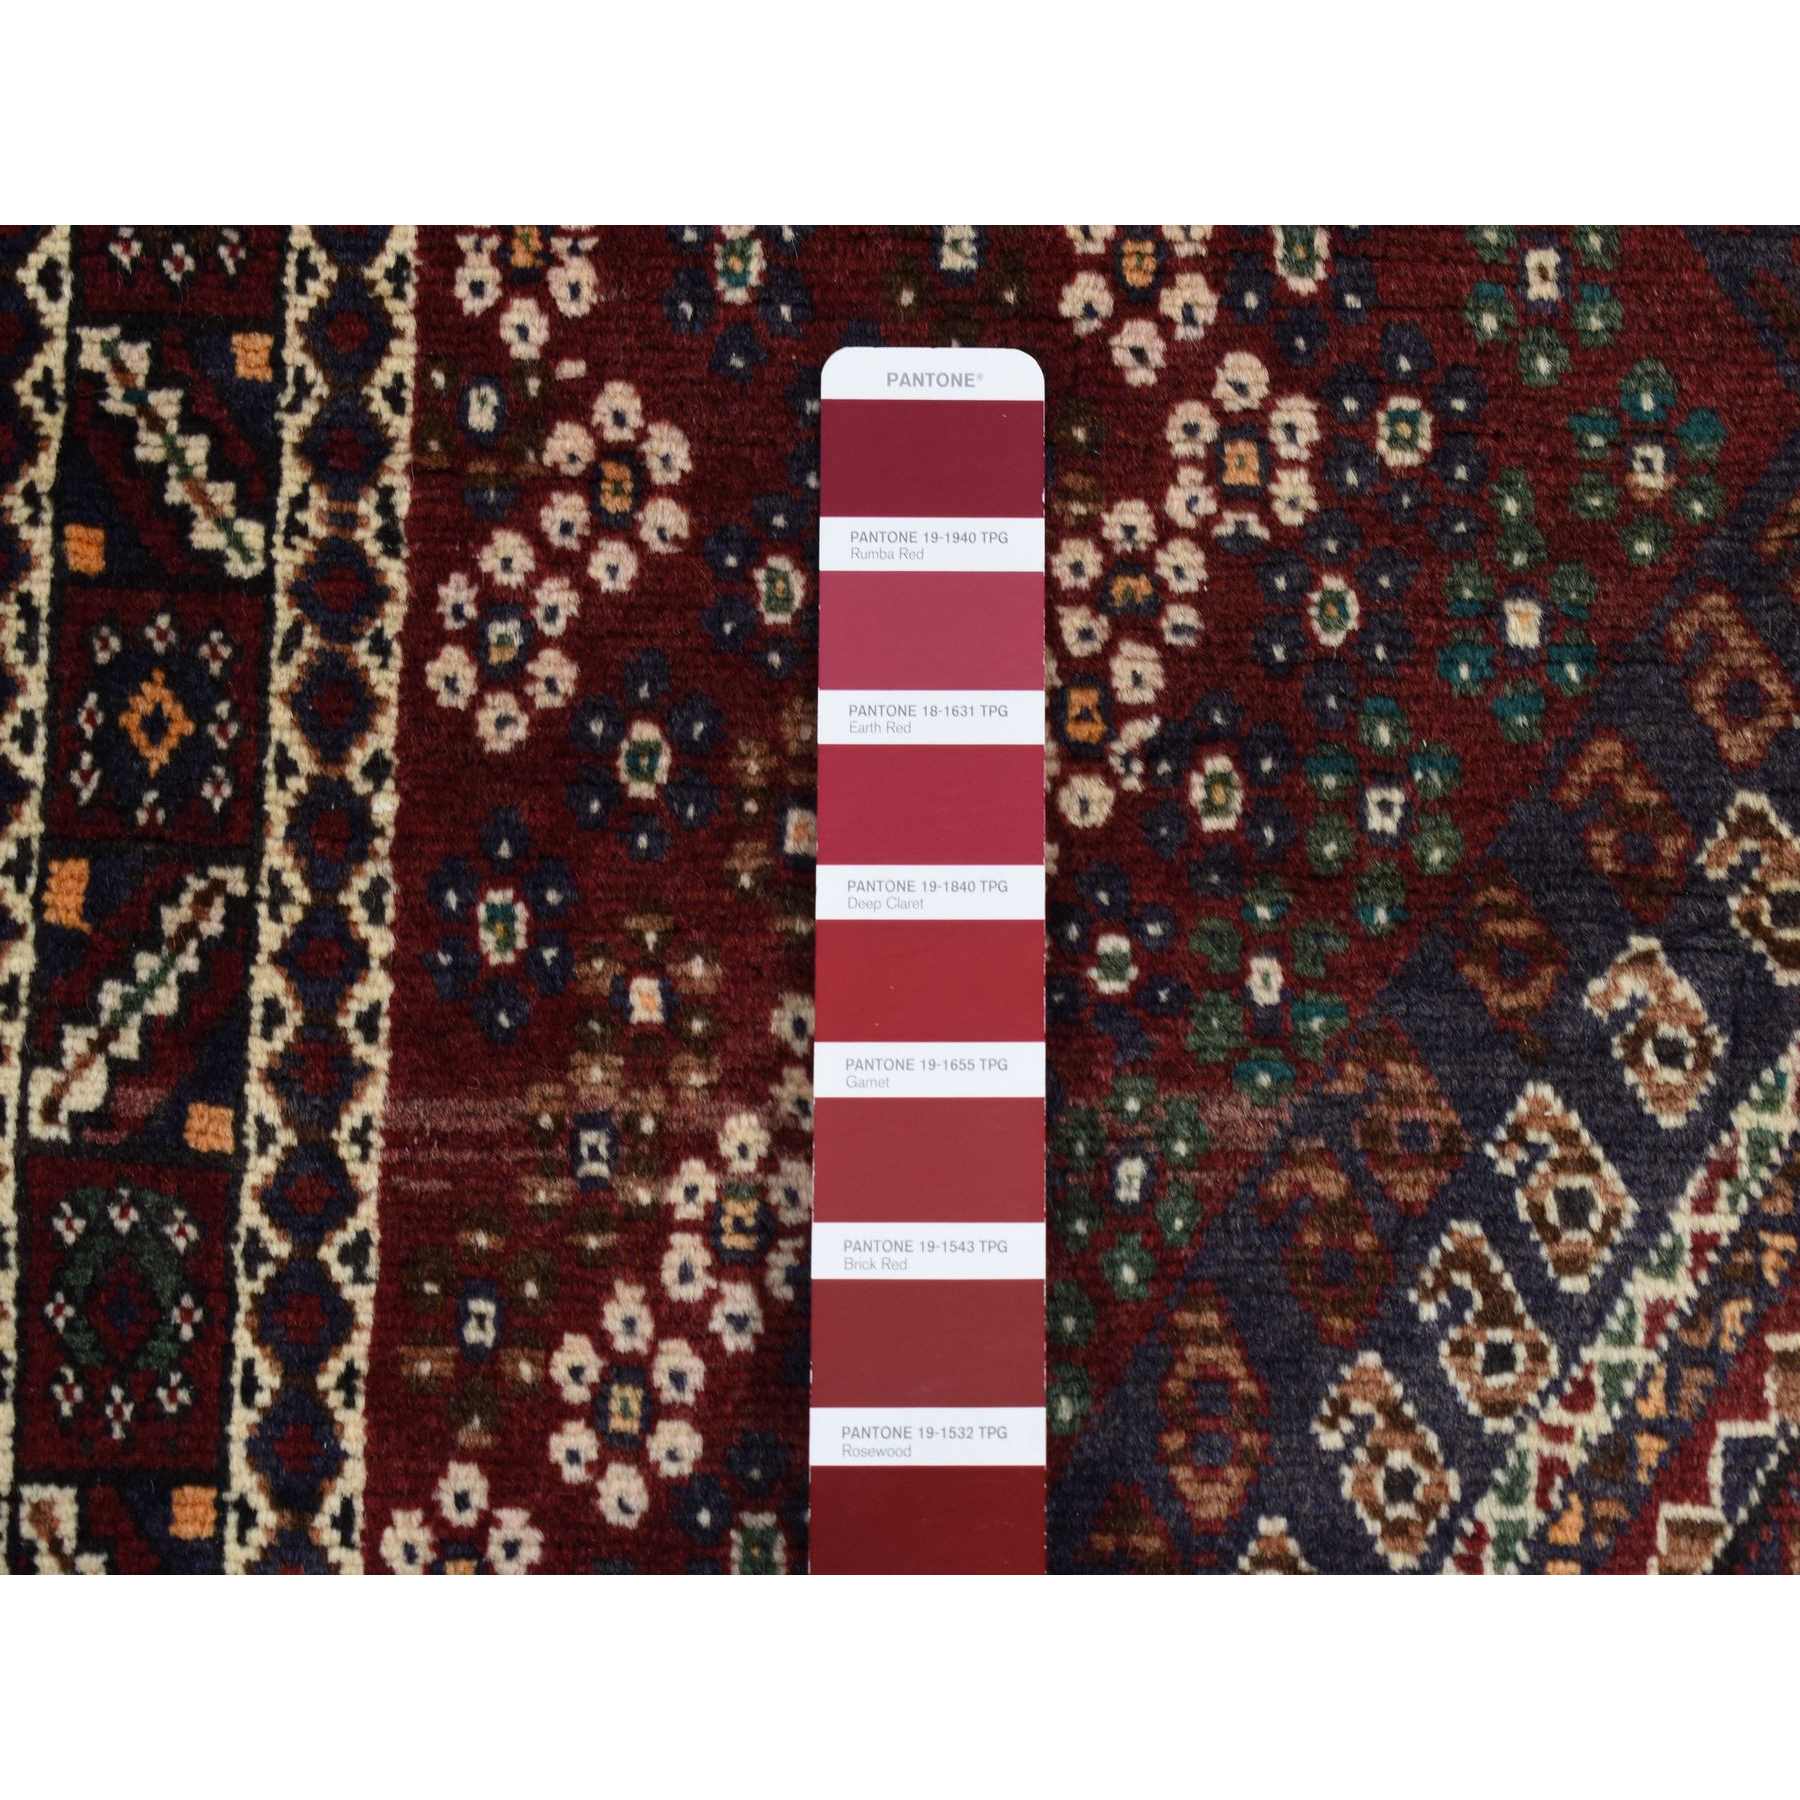 Persian-Hand-Knotted-Rug-436995